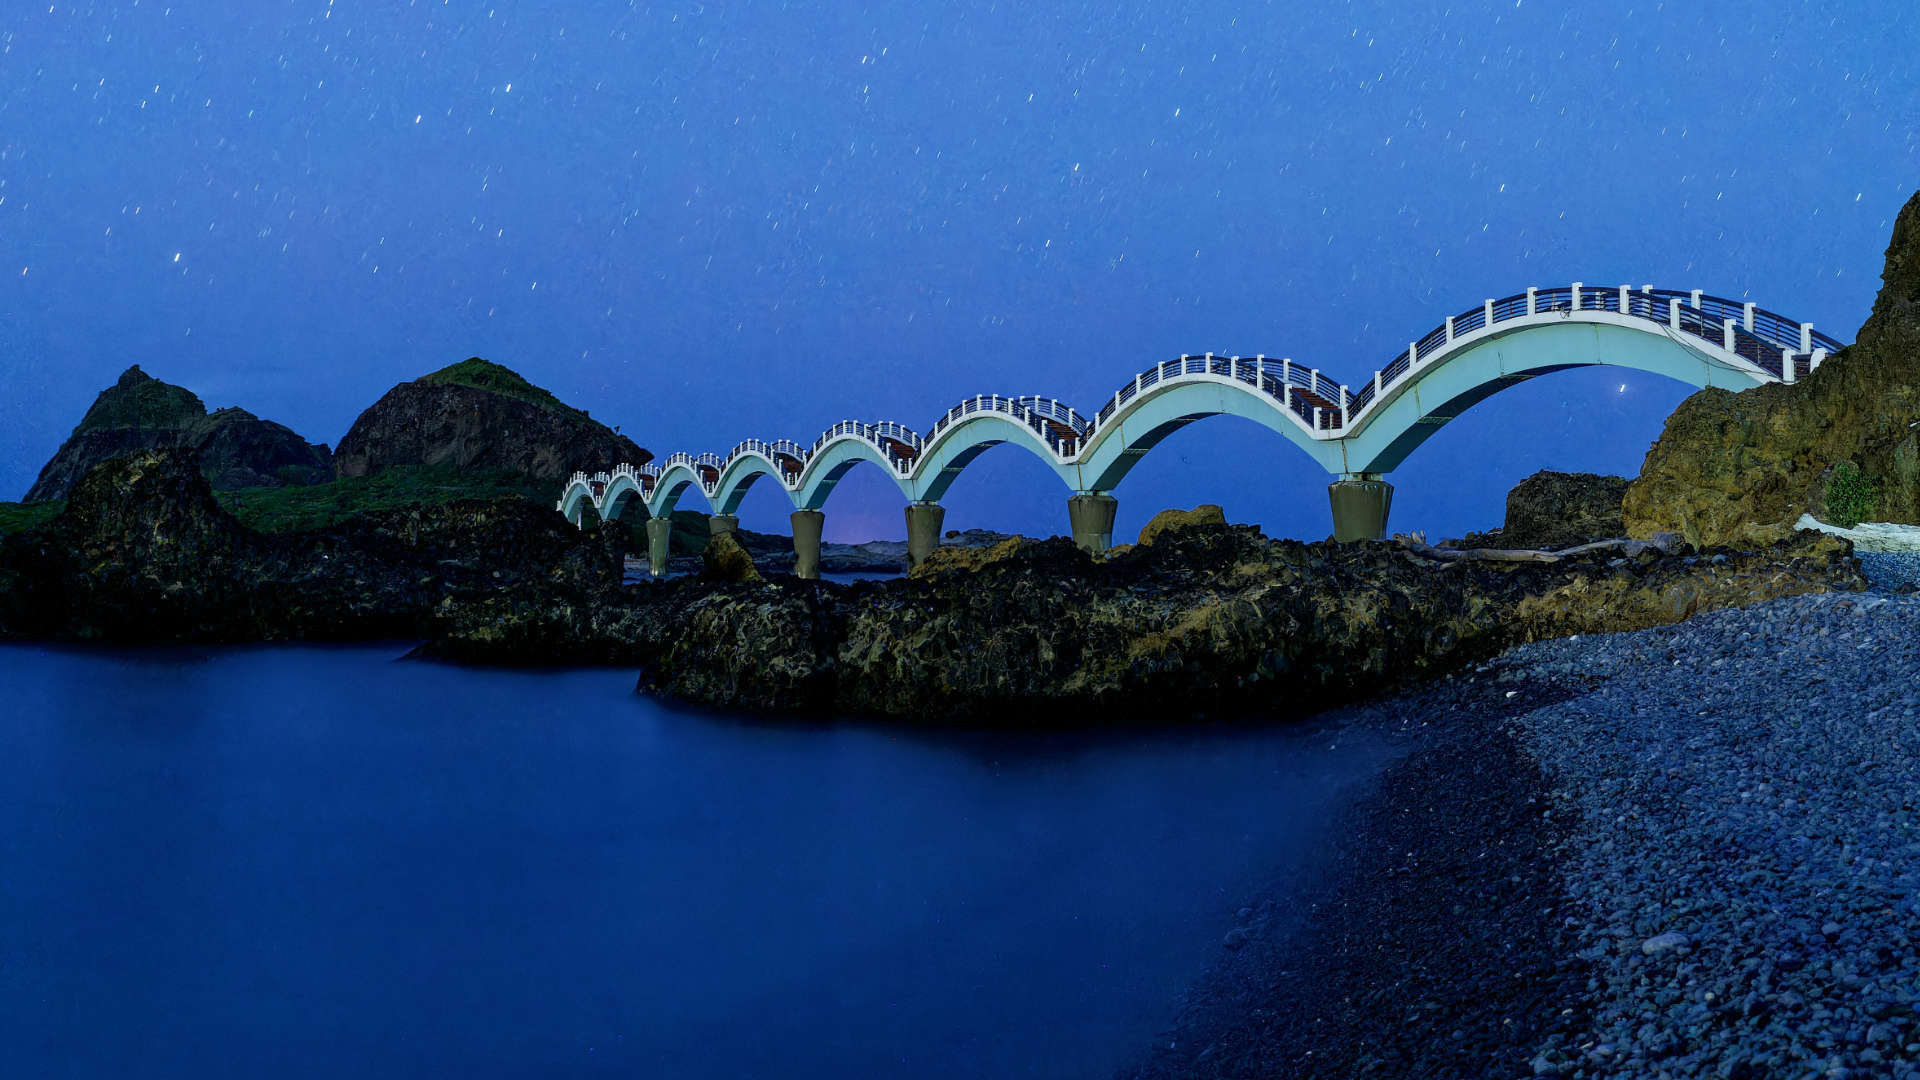 A pedestrian bridge to a small island. The bridge comprises eight arches, each of which people must walk up and over. This is a long-exposure nighttime photograph, with a stony beach in the foreground.